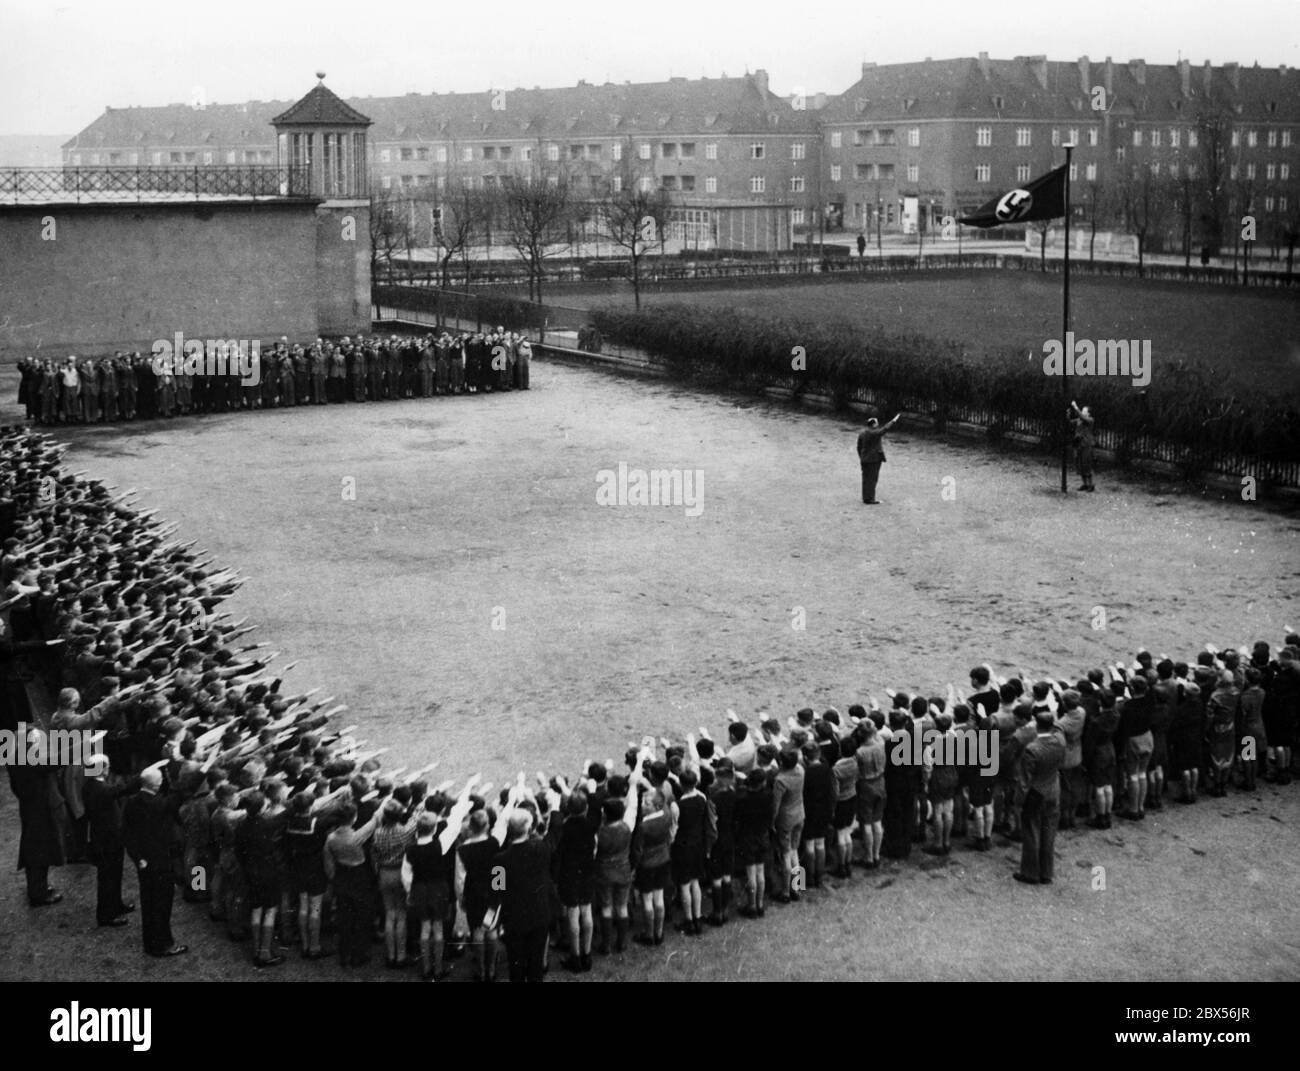 In the schoolyard of the Askanian Gymnasium in Tempelhof a swastika flag is hoisted in front of the lined up students and teachers. Stock Photo